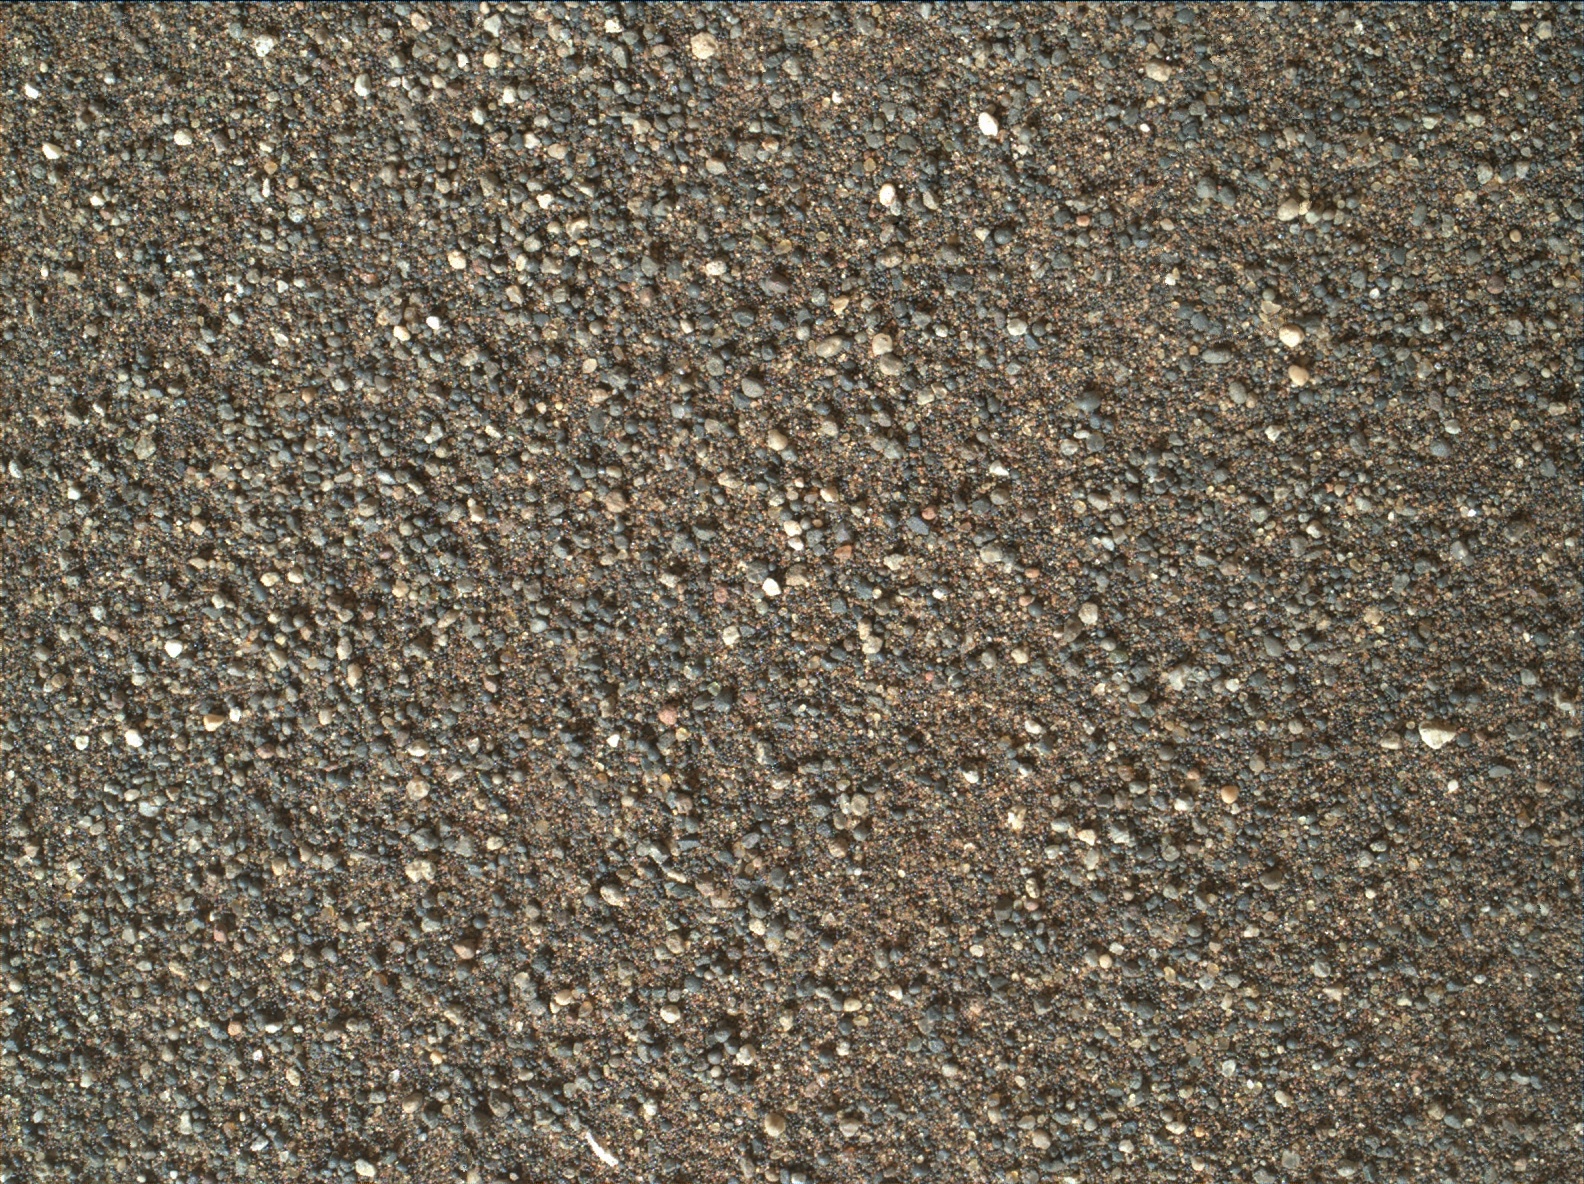 Nasa's Mars rover Curiosity acquired this image using its Mars Hand Lens Imager (MAHLI) on Sol 1518